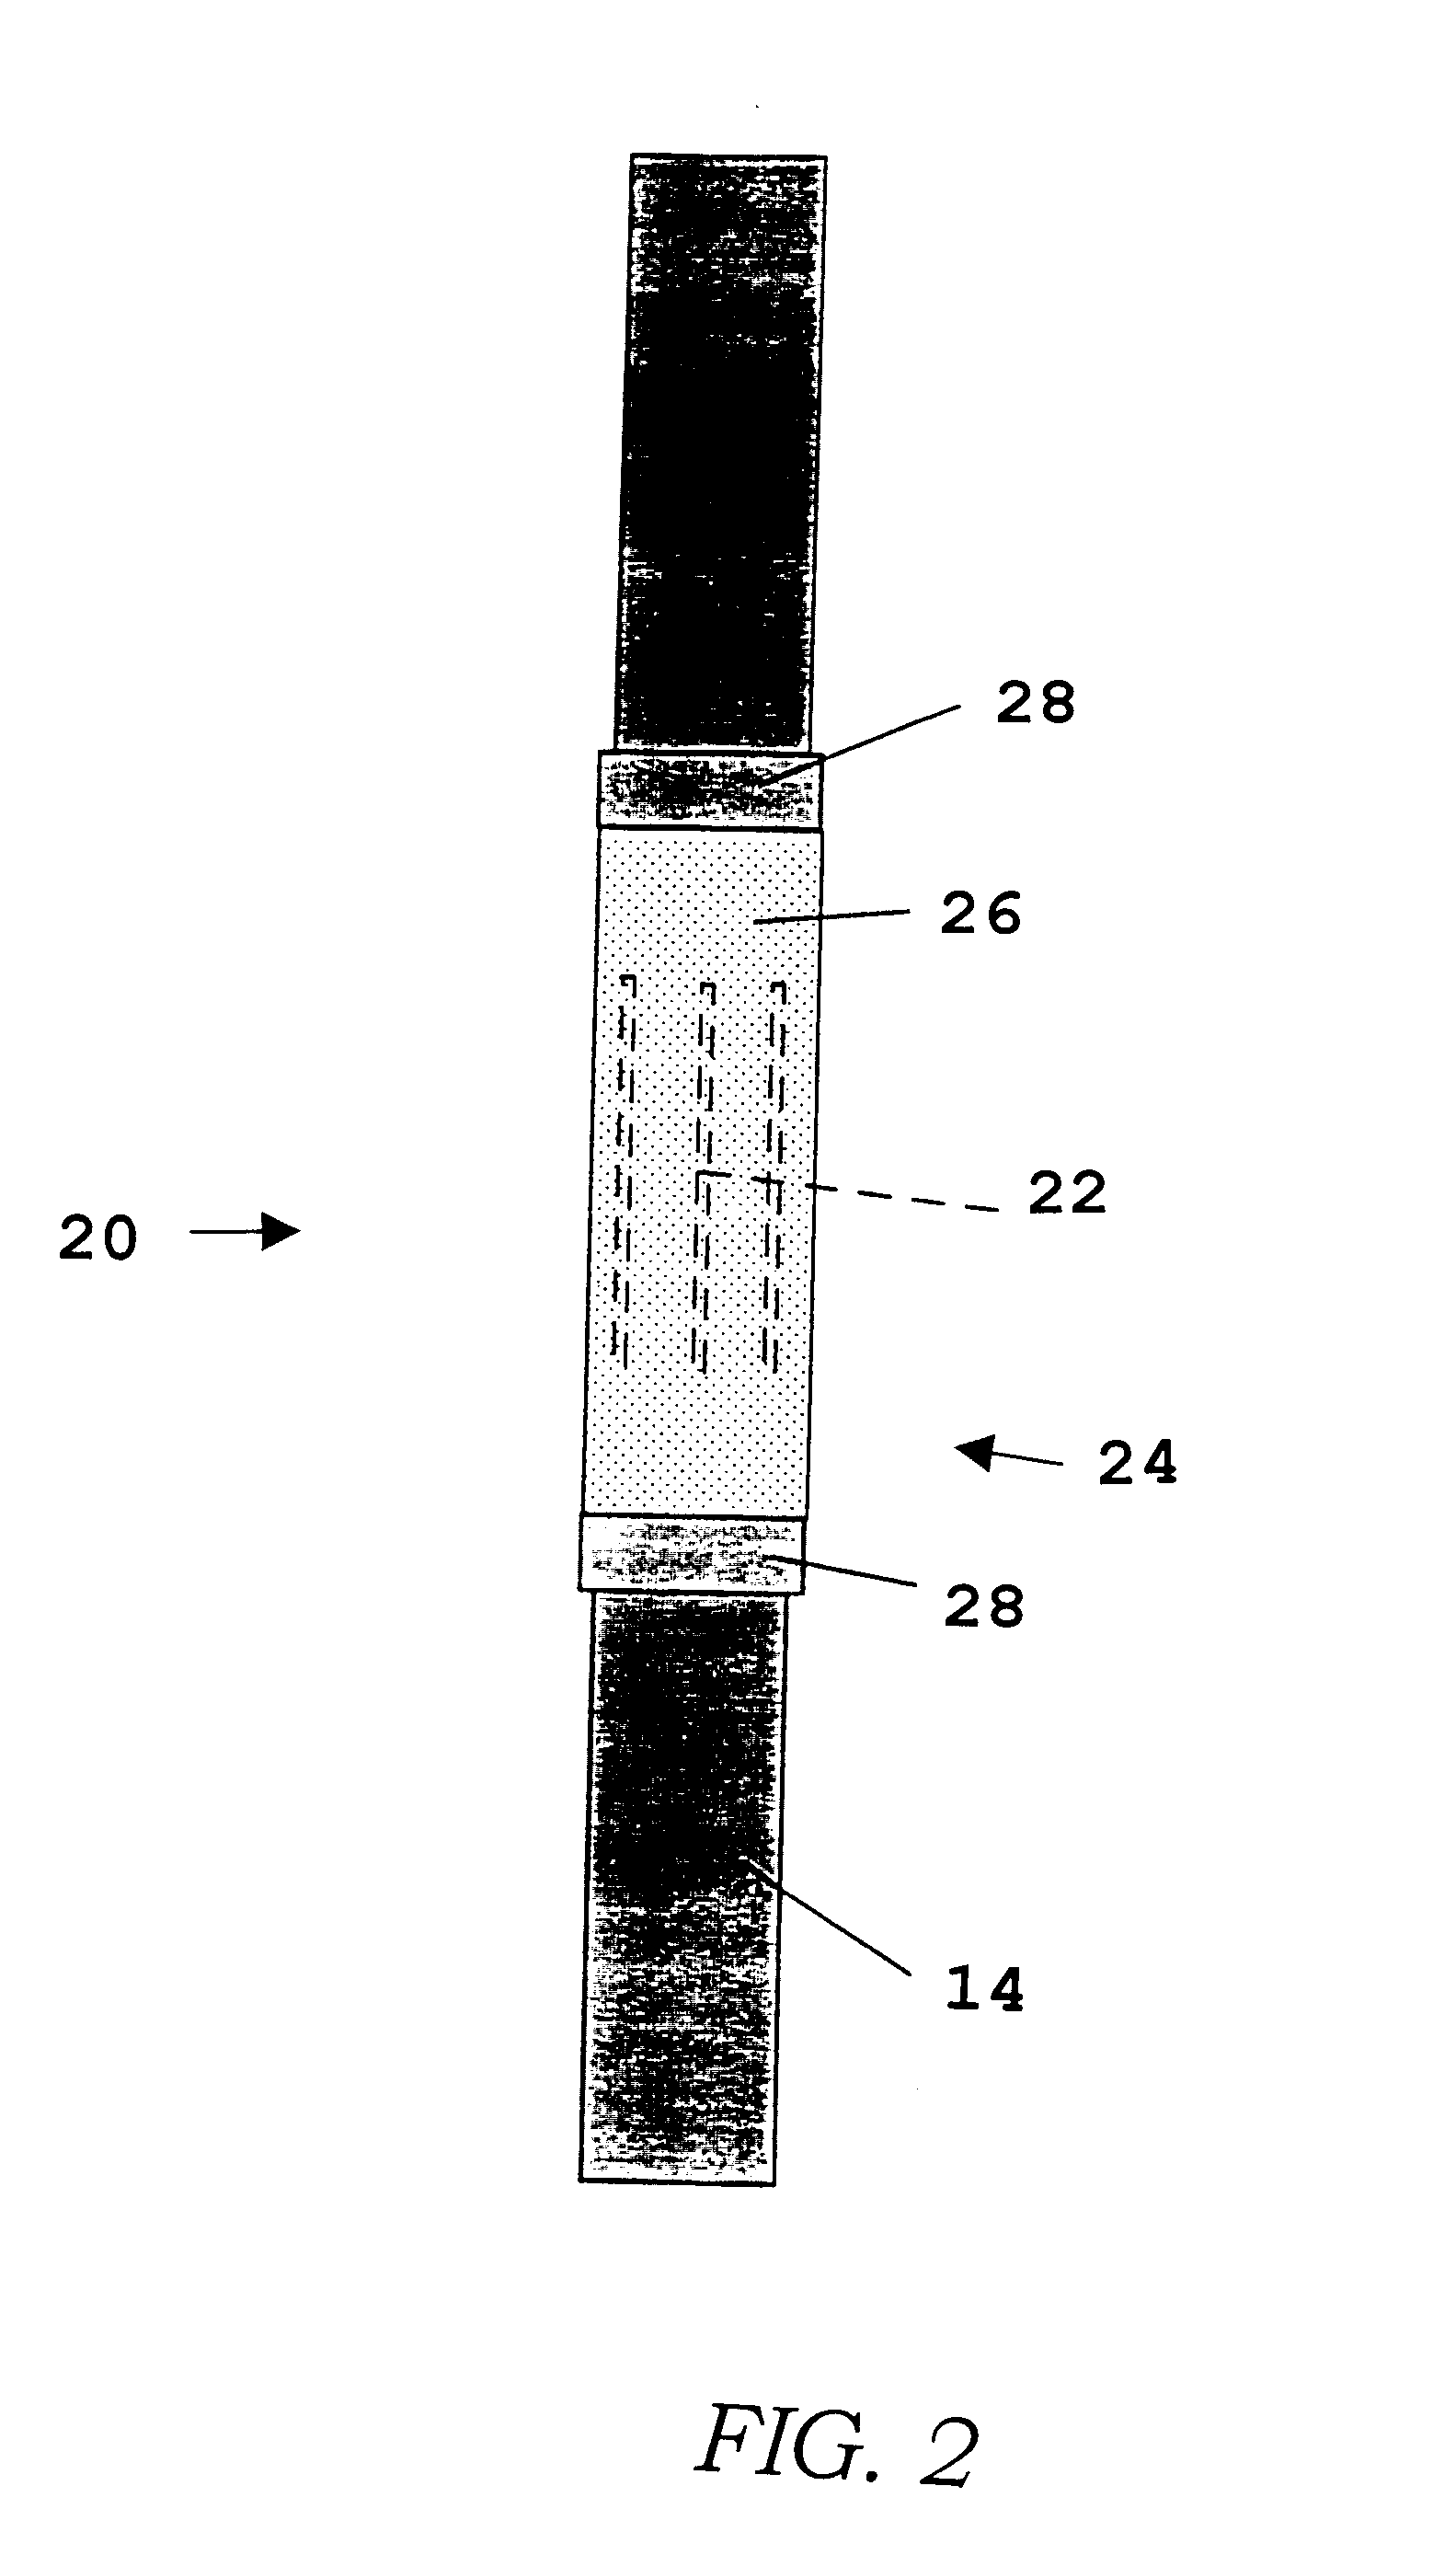 Measurement while drilling electromagnetic telemetry system using a fixed downhole receiver